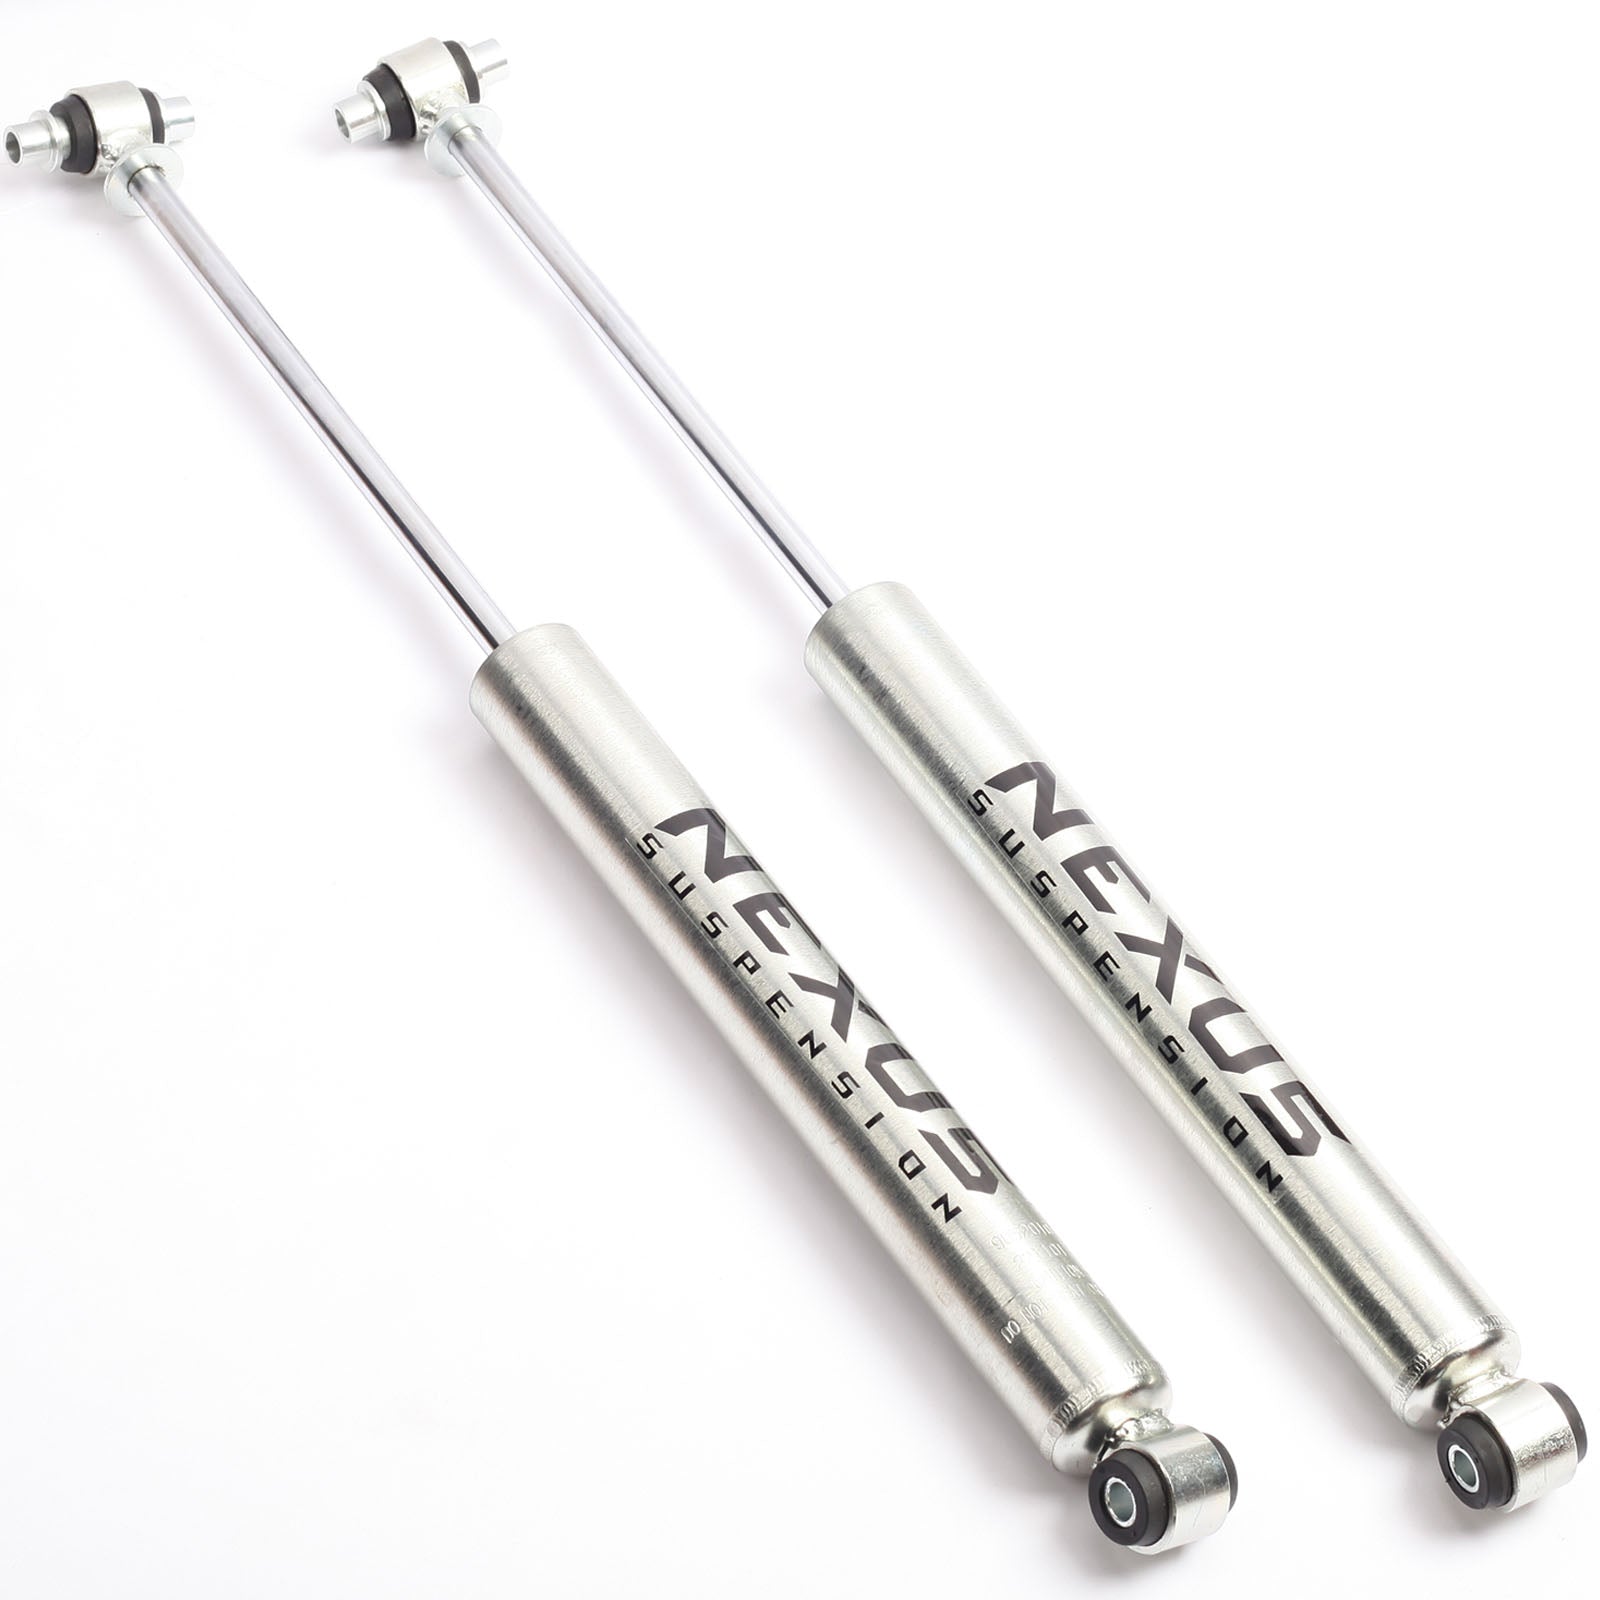 NEXUS SUSPENSION 3-4 Inch Lift Rear Shock Absorber for 2009-2014 Ford F-150 2wd/4wd,Zinc Plated Coating,Pair Pack